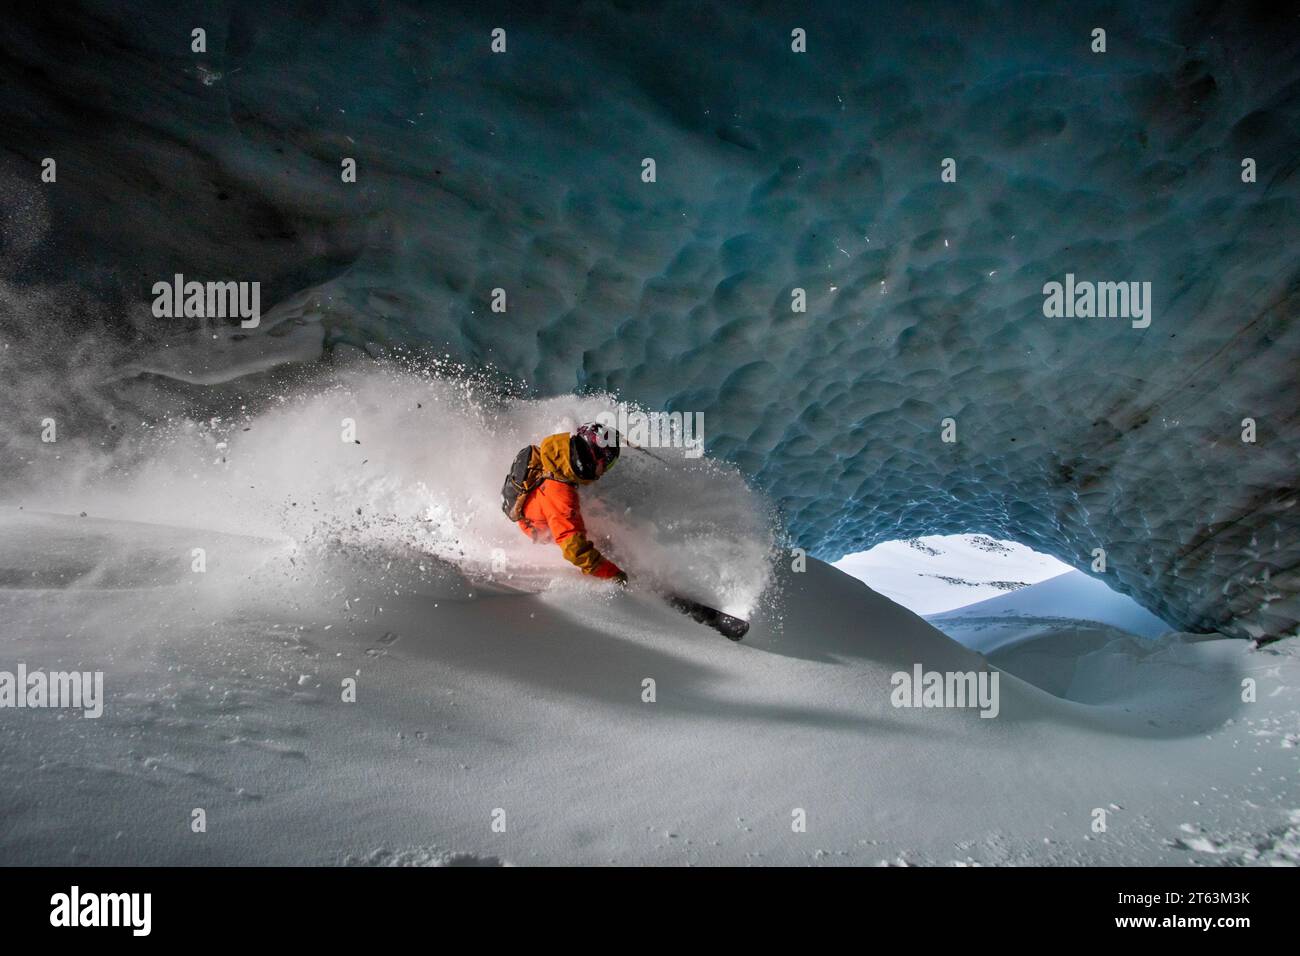 Unrecognizable skier in warm suit skiing on slope in cave at snowy mountain during vacation at Swiss Alps Stock Photo